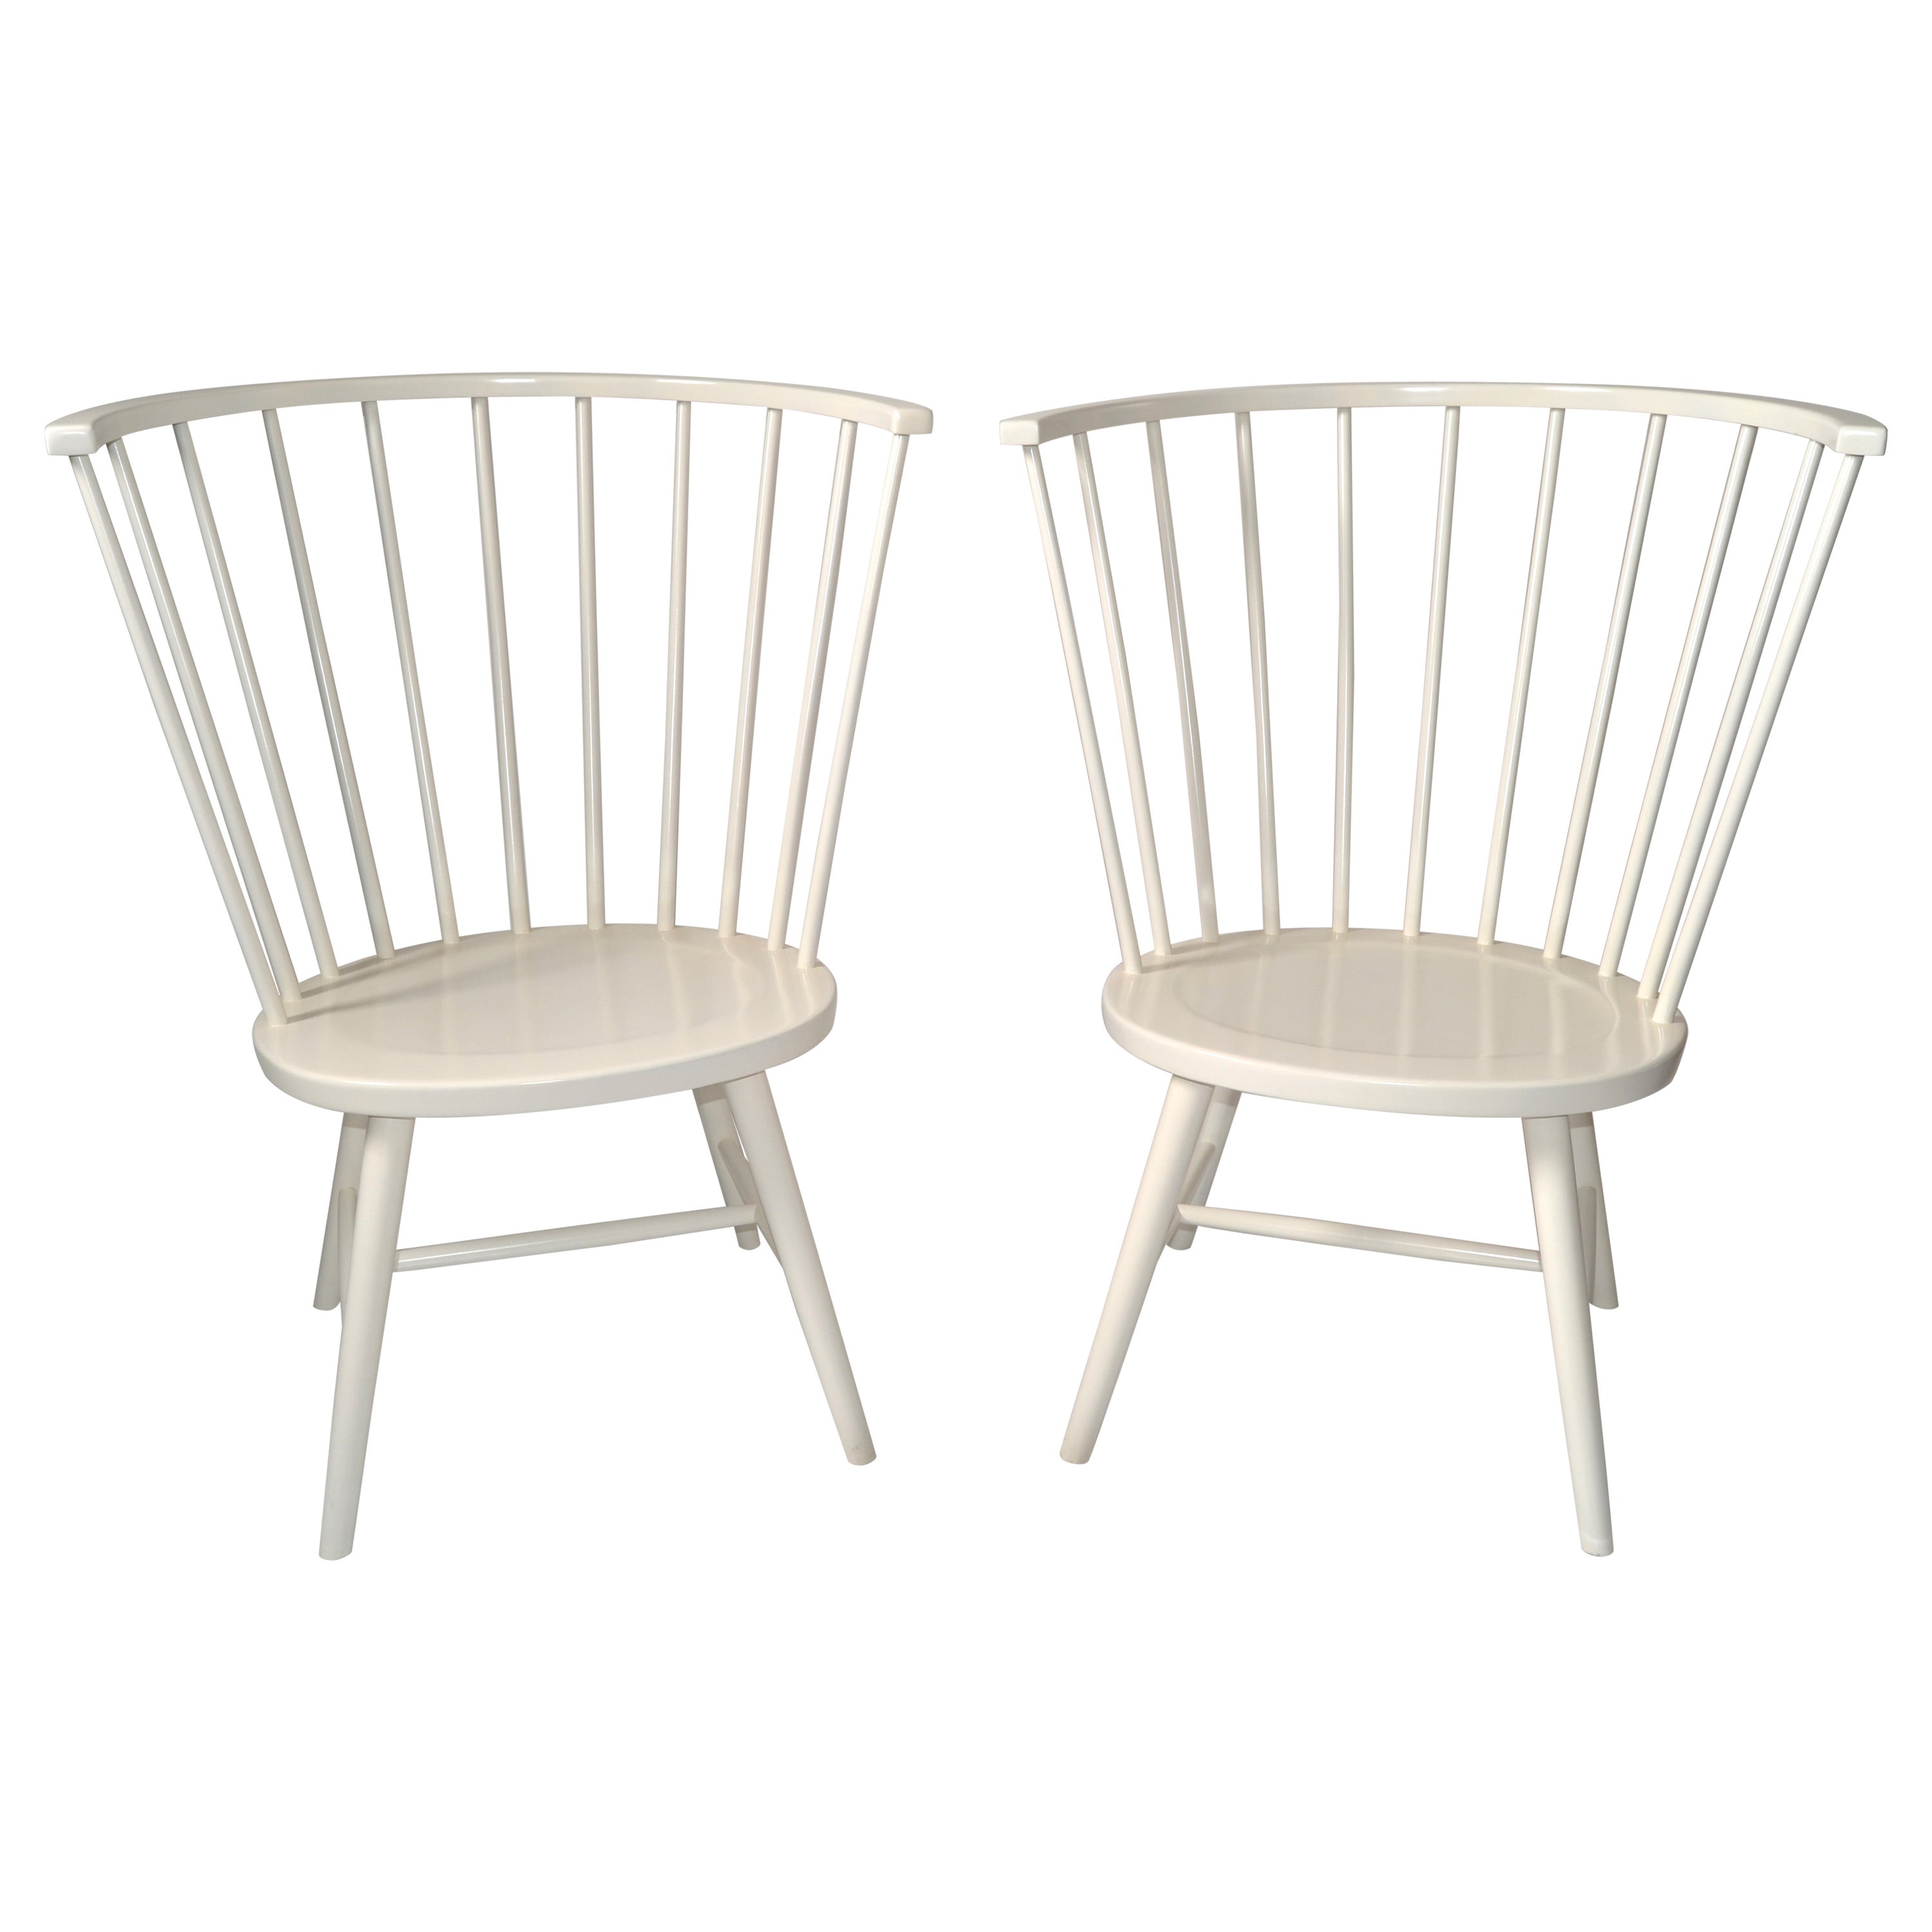 Pair, Riviera Windsor High Backed White Chairs By Paola Navone Rustic American   For Sale